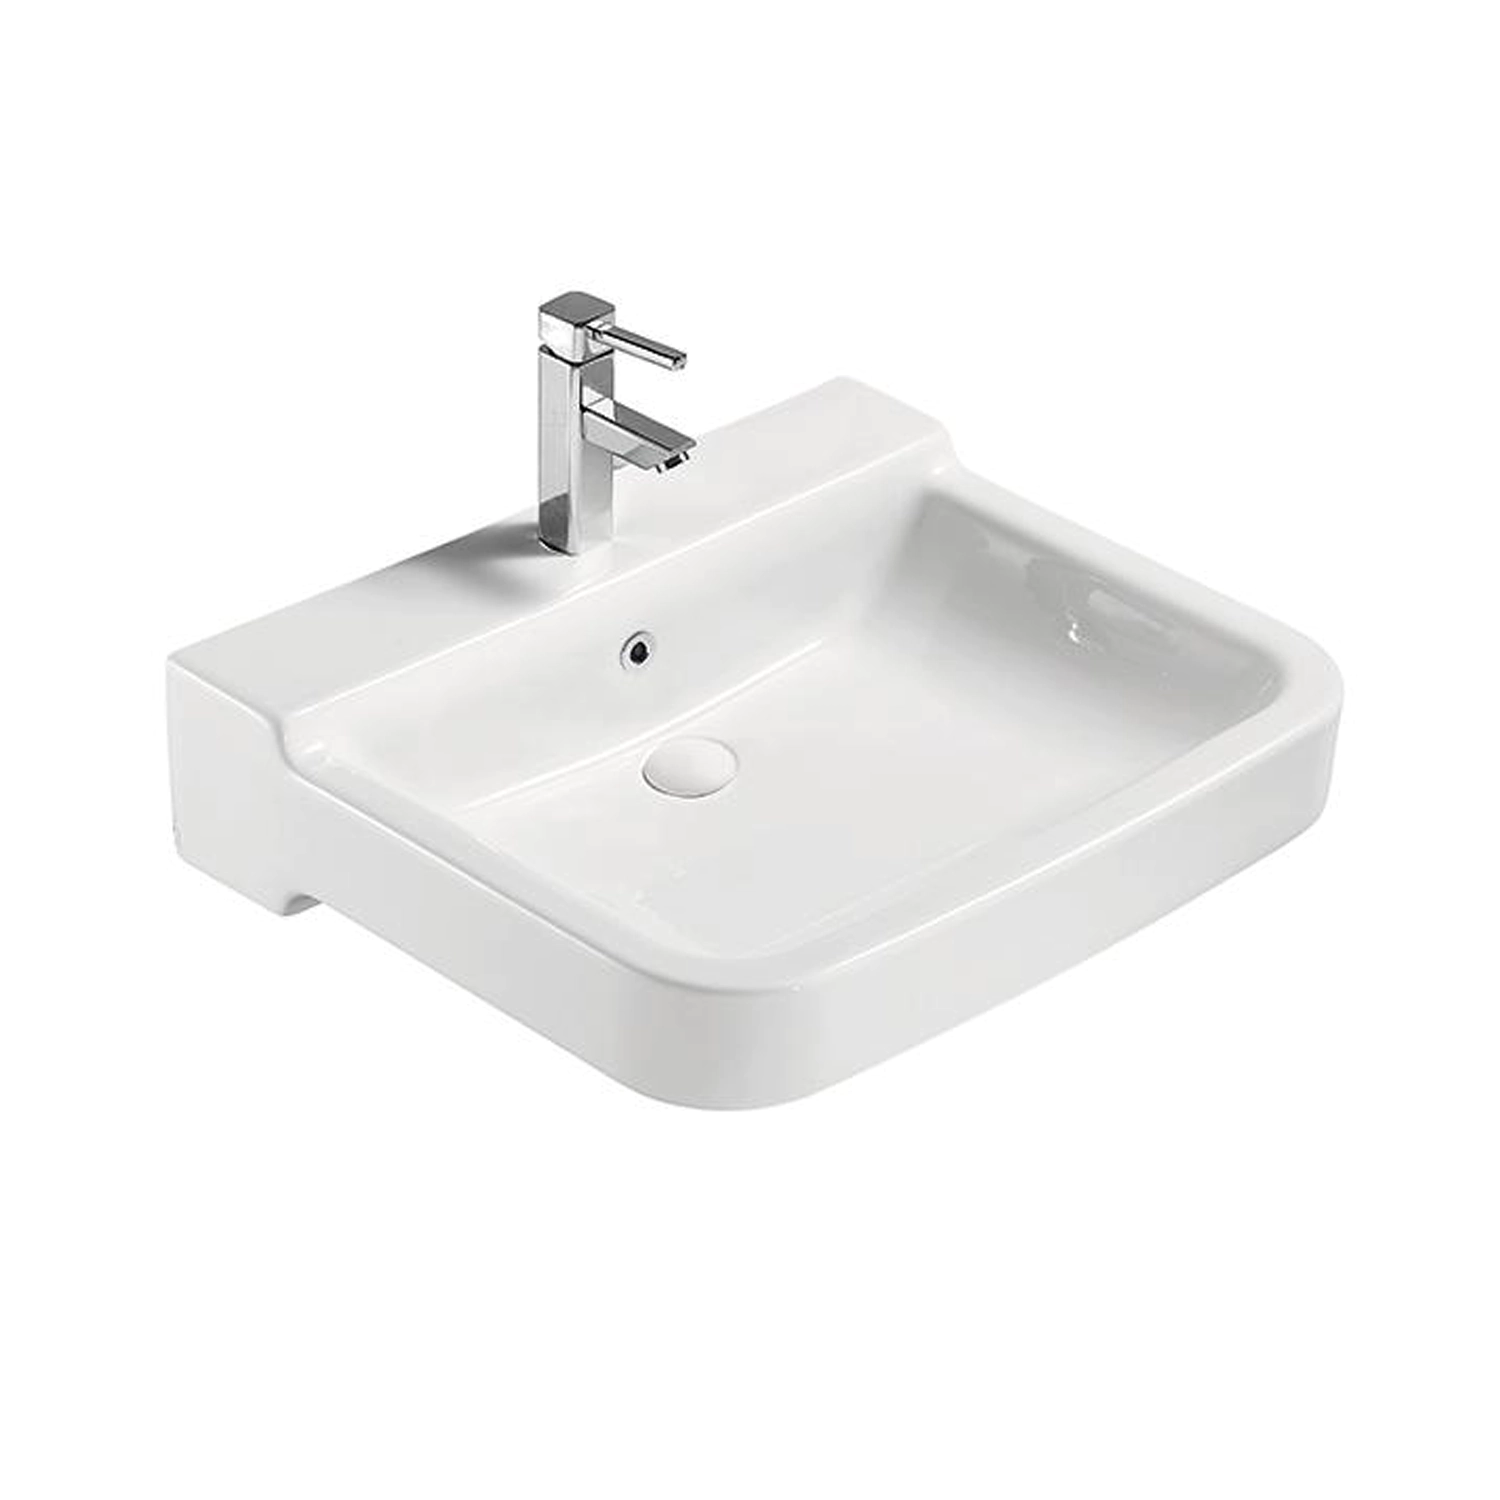 25 inch bathroom ADA sink for barrier-free bathrooms wheelchair ceramic bathroom sink with concave front edge, side elbow rests